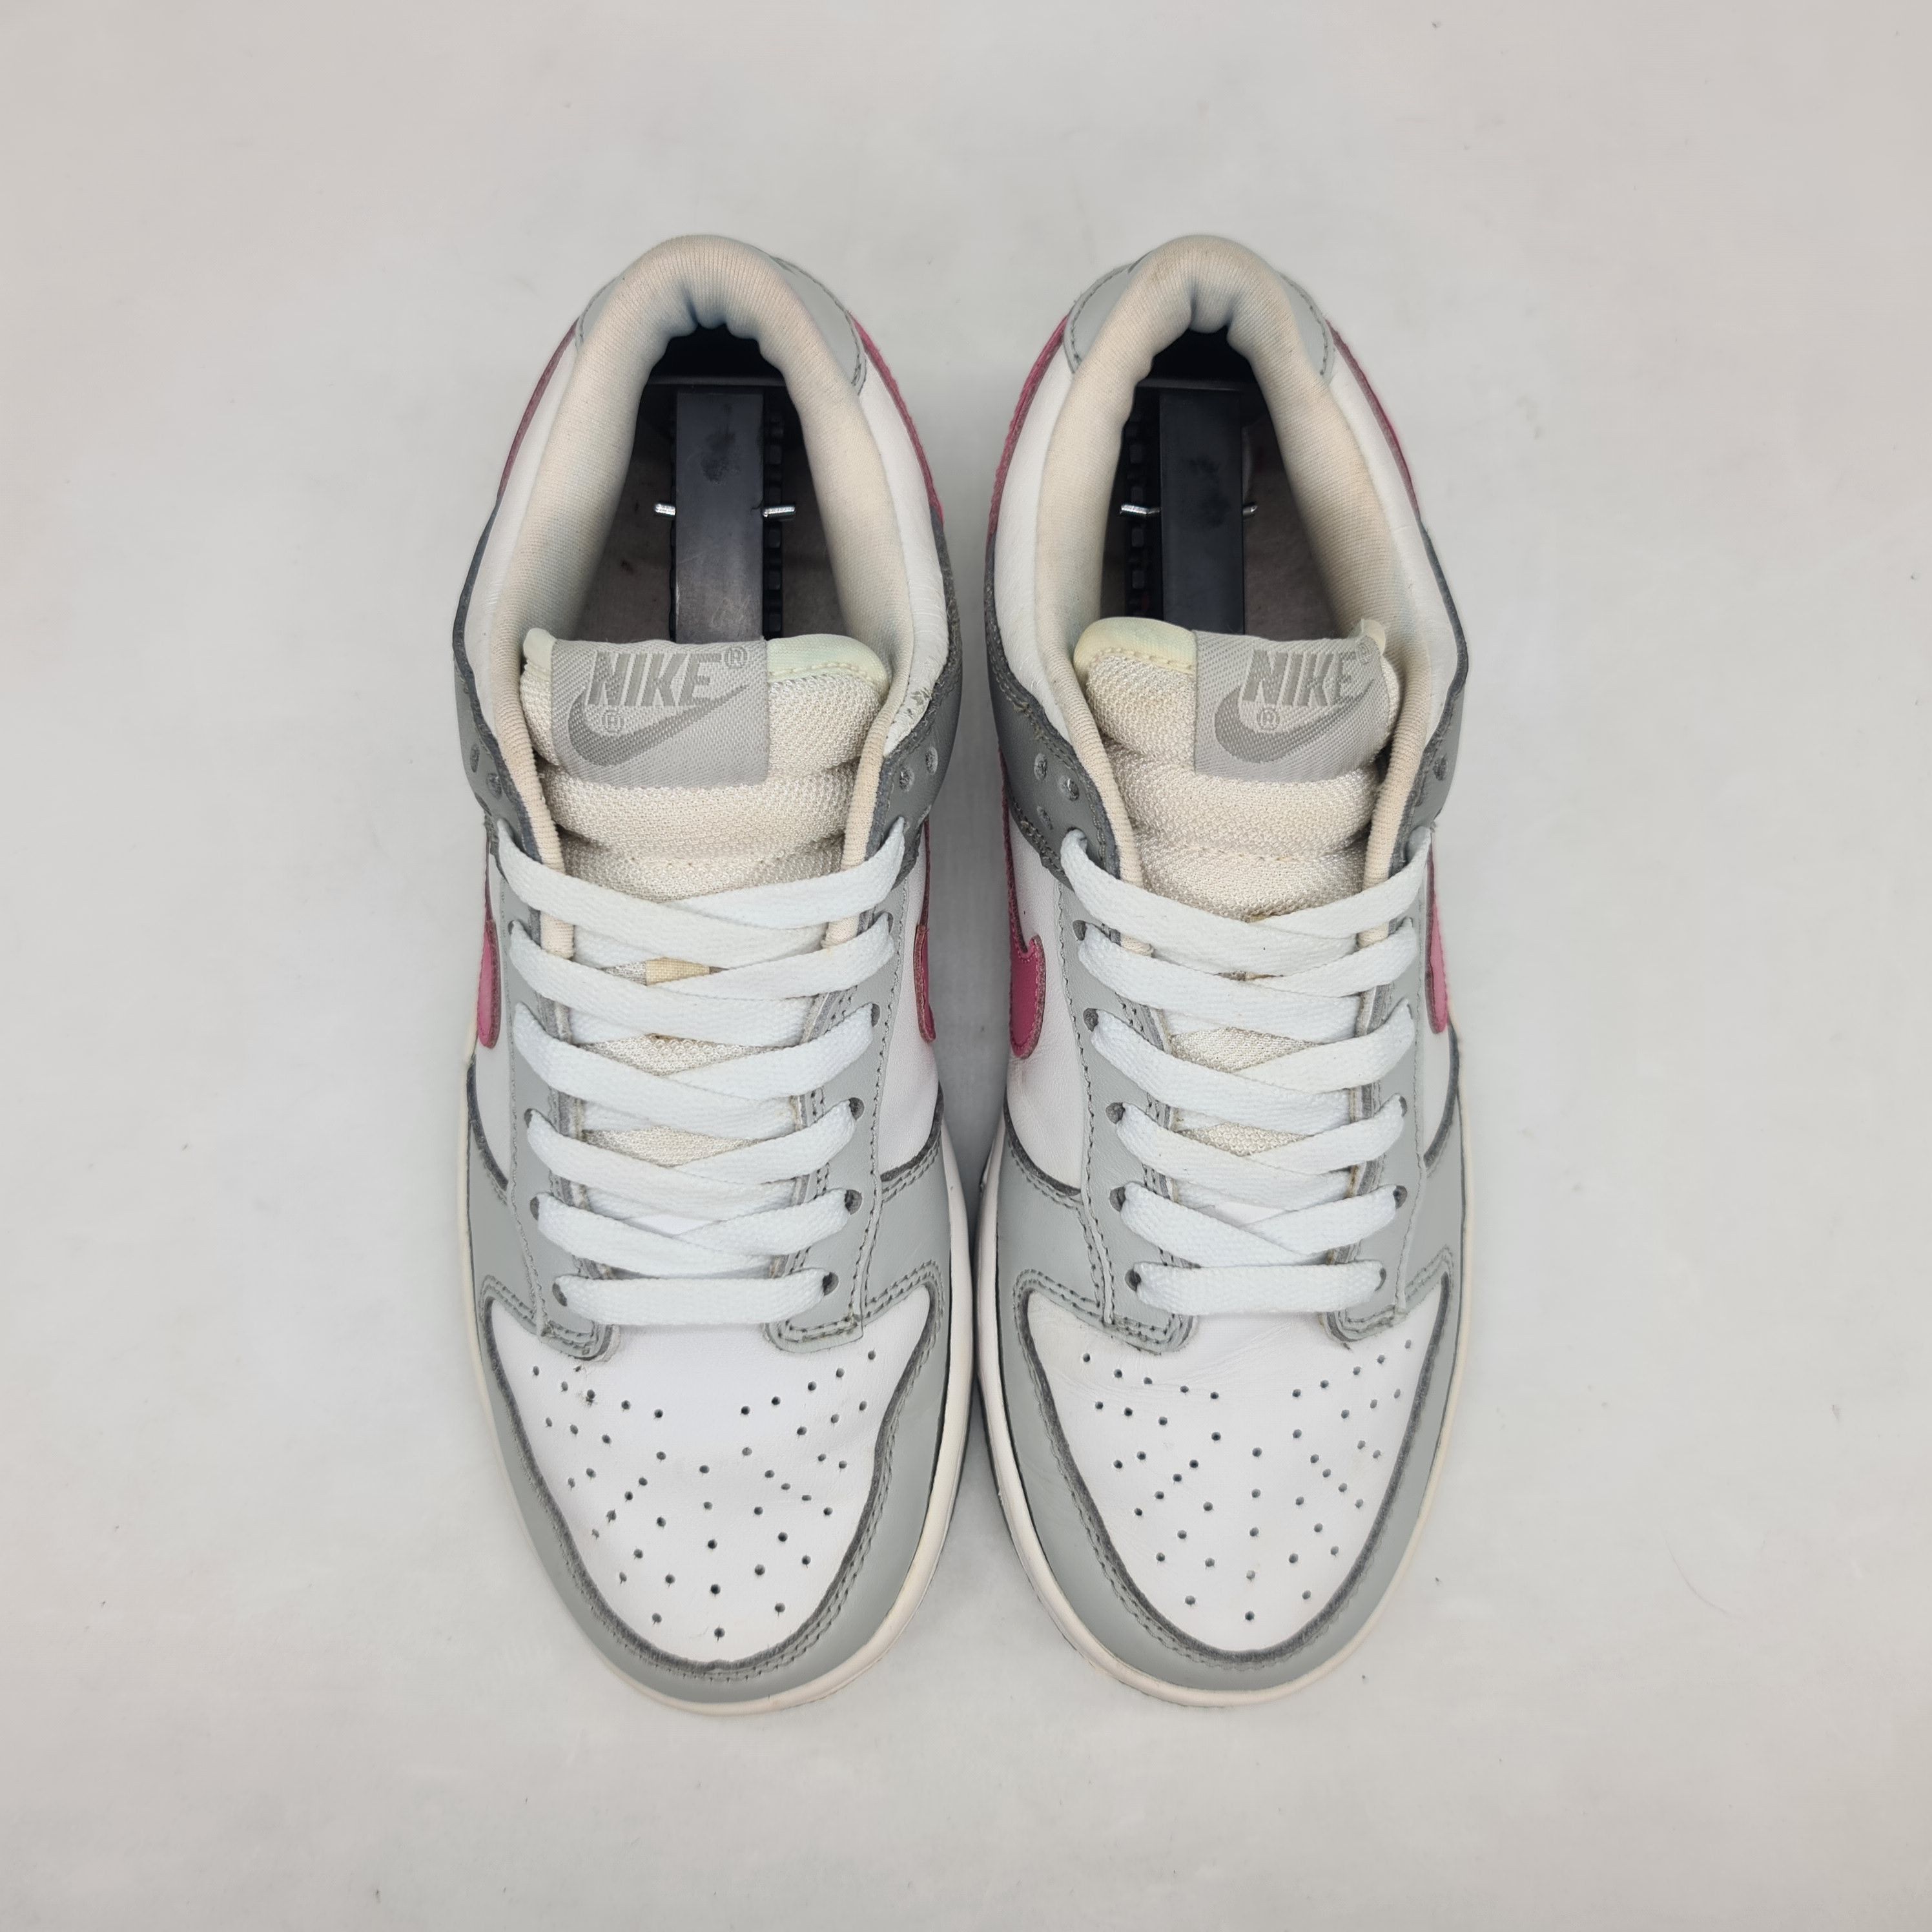 Nike - 2004 W's Dunk Low Pro Pink Neutral Gray - 3